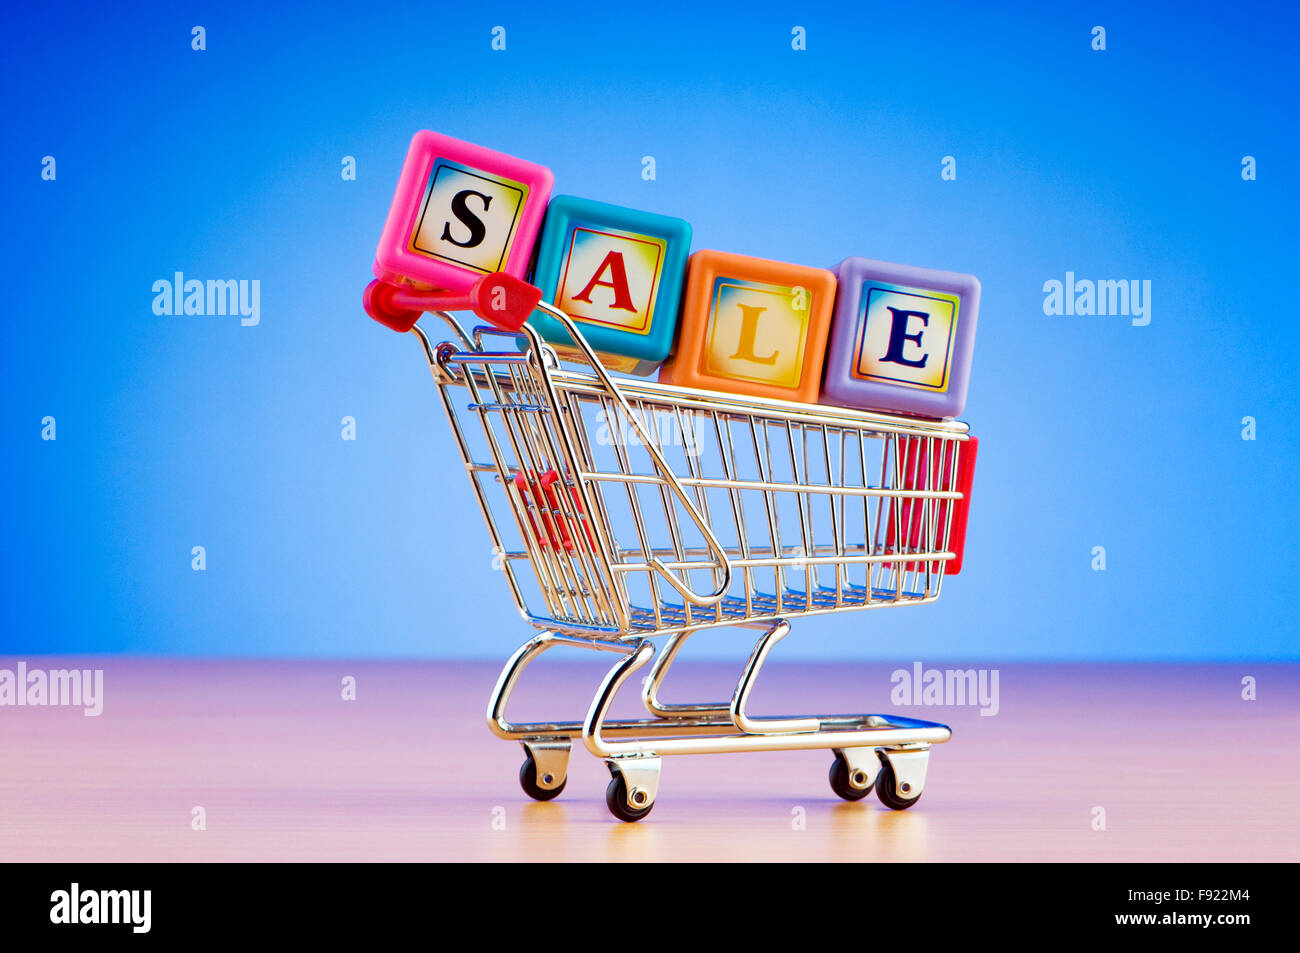 Mini shopping cart against gradient background Stock Photo